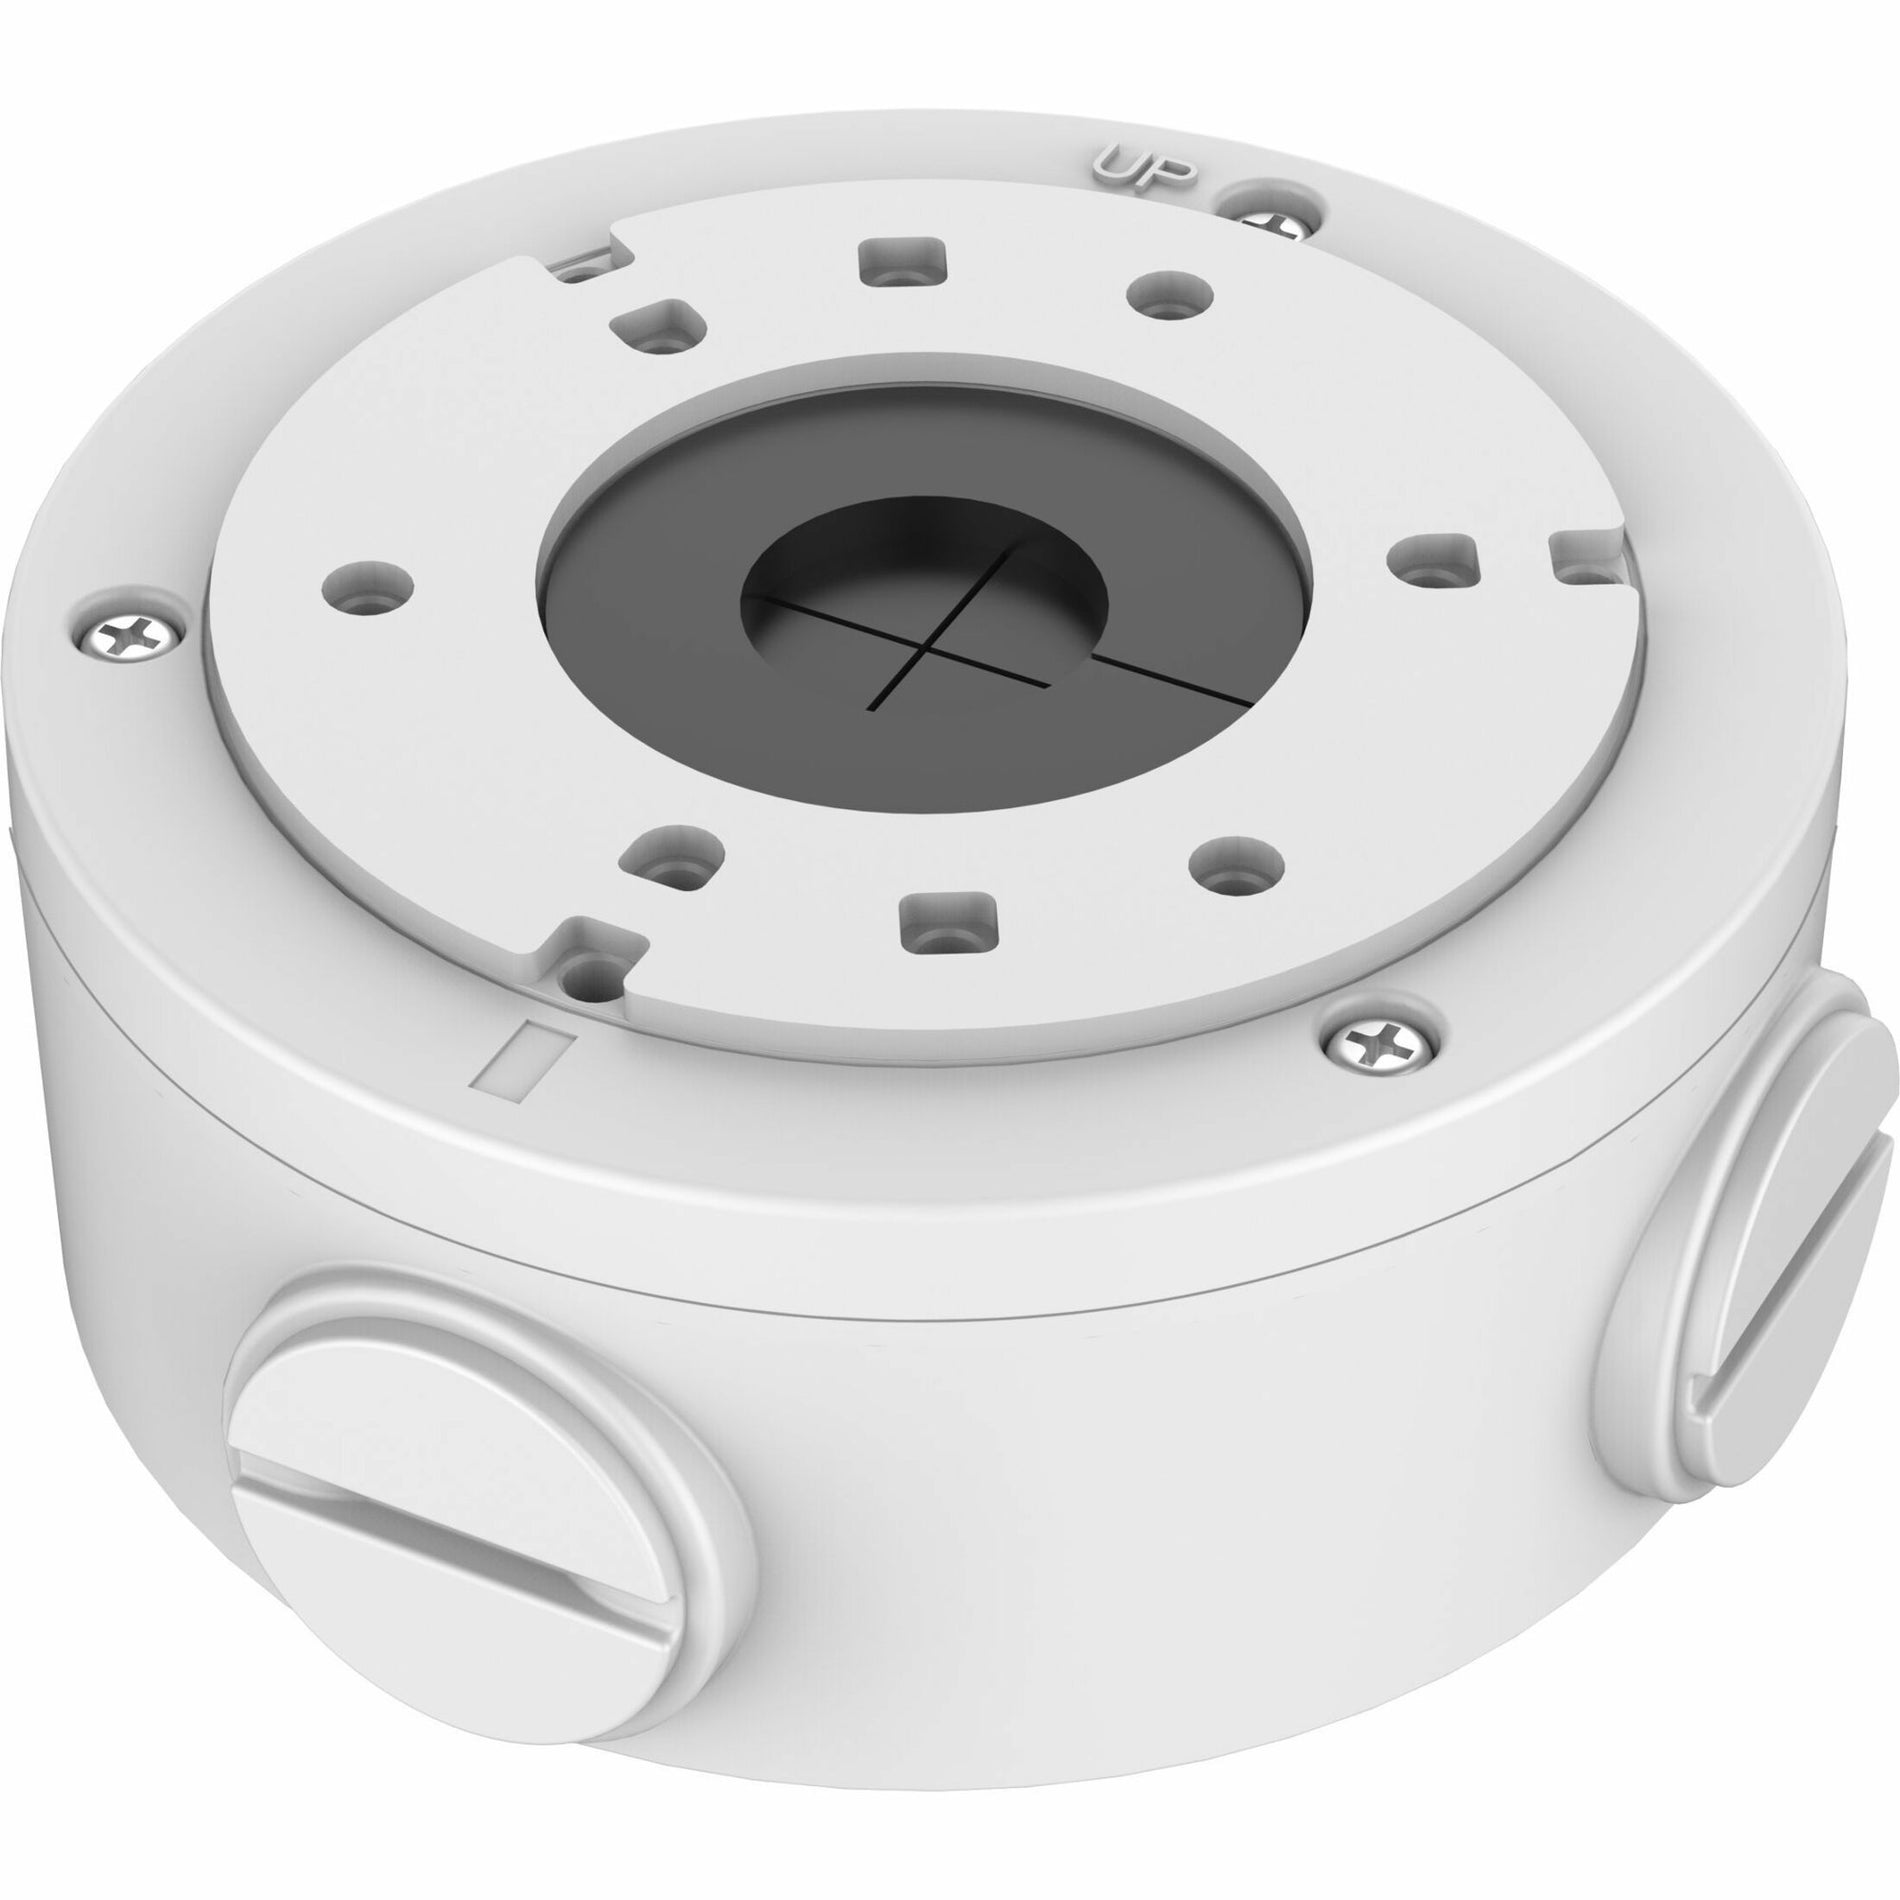 Hikvision CBXS Mounting Box for Surveillance Camera - White